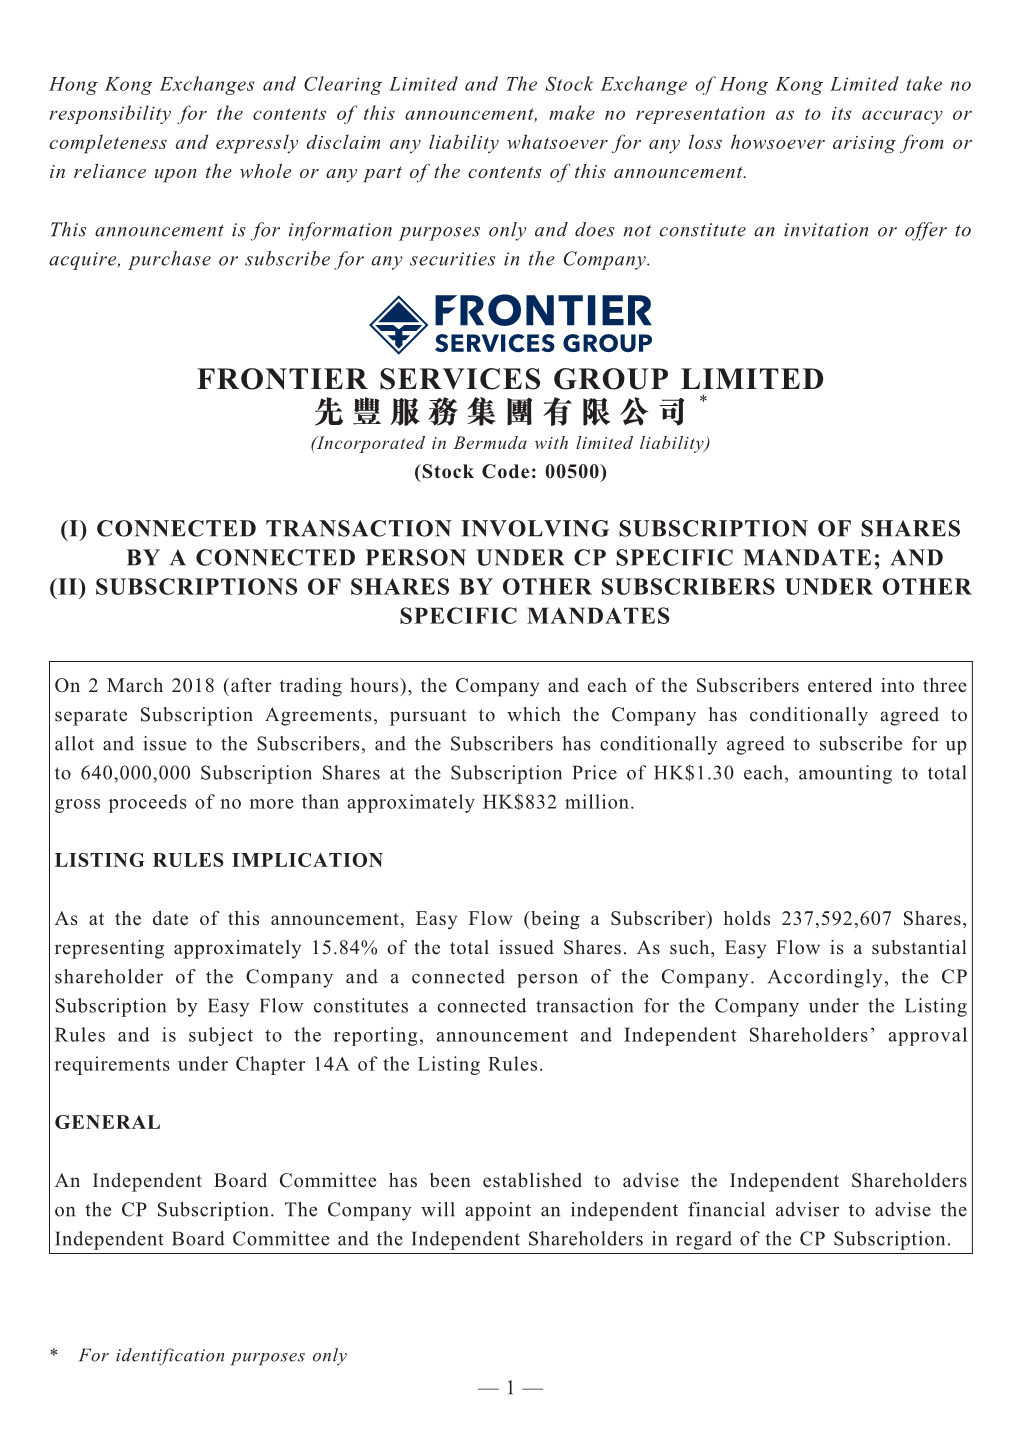 FRONTIER SERVICES GROUP LIMITED 先 豐 服 務 集 團 有 限 公 司 * (Incorporated in Bermuda with Limited Liability) (Stock Code: 00500)